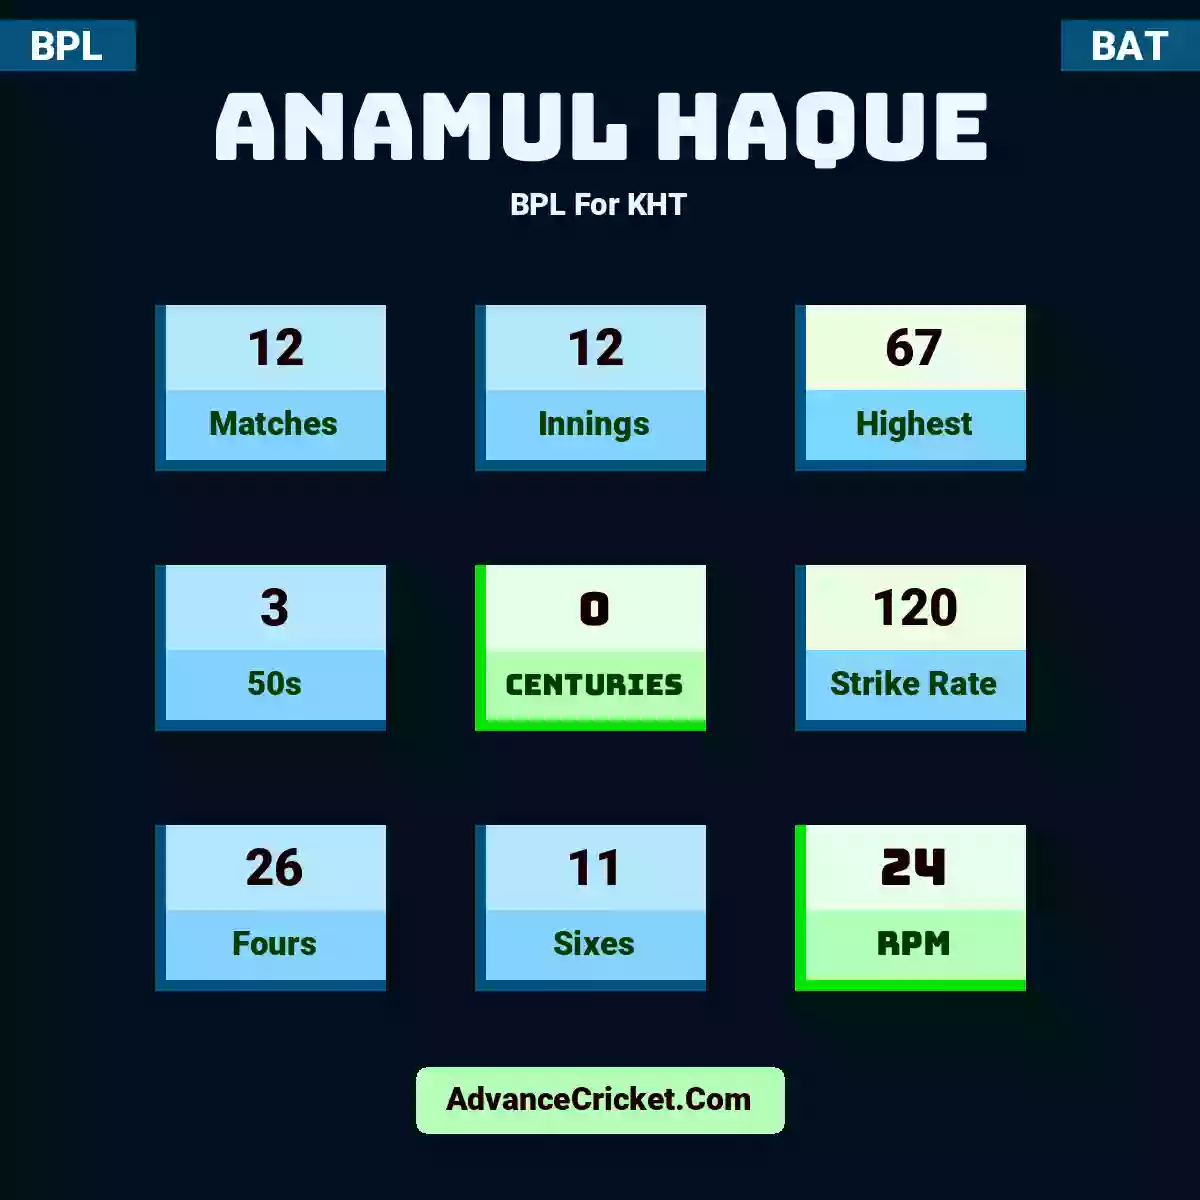 Anamul Haque BPL  For KHT, Anamul Haque played 12 matches, scored 67 runs as highest, 3 half-centuries, and 0 centuries, with a strike rate of 120. A.Haque hit 26 fours and 11 sixes, with an RPM of 24.